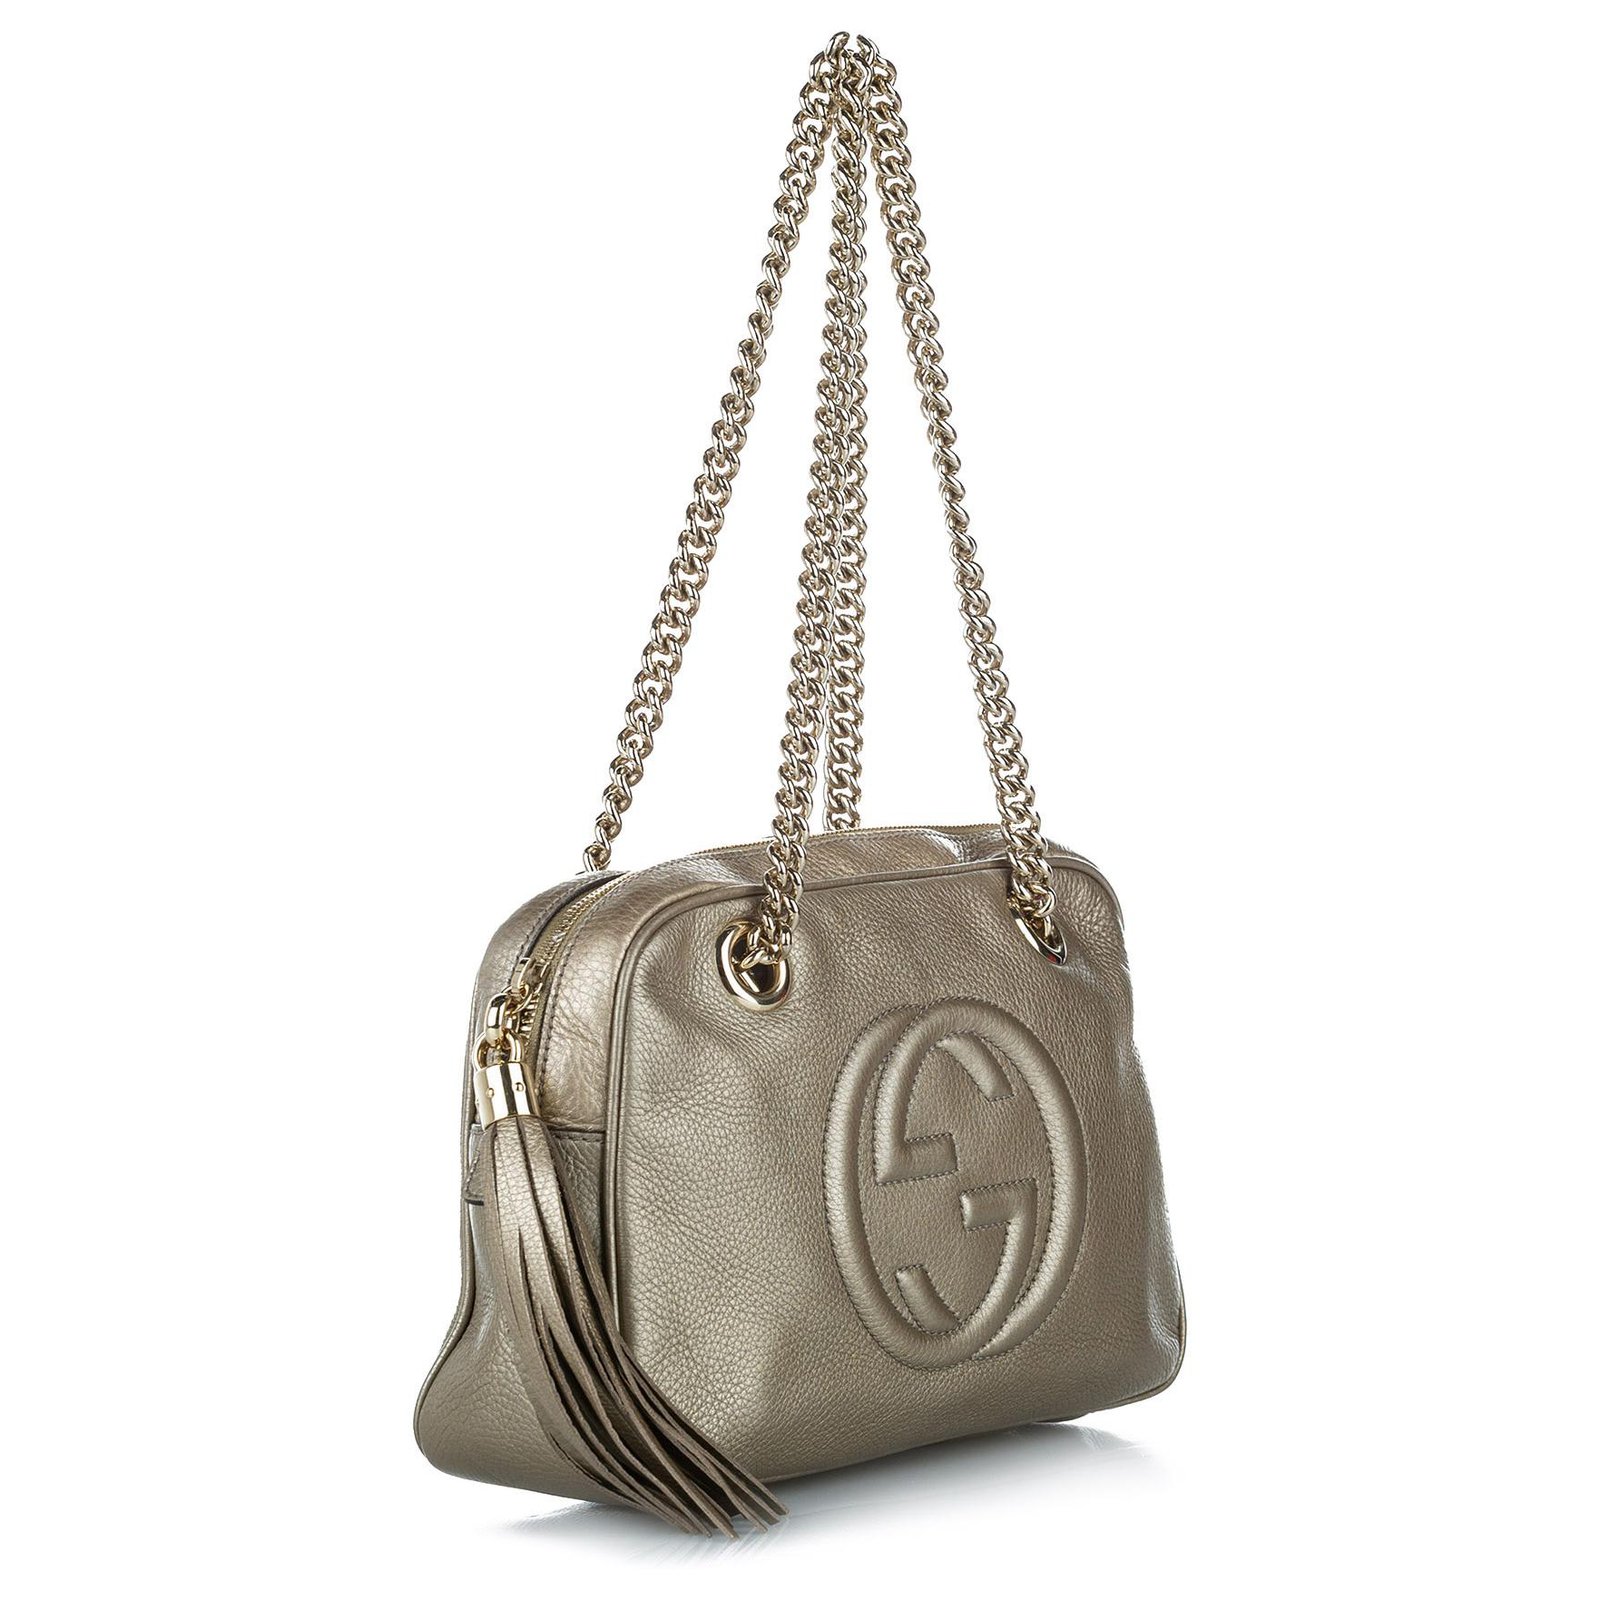 Gucci Brown Soho Chain Leather Shoulder Bag